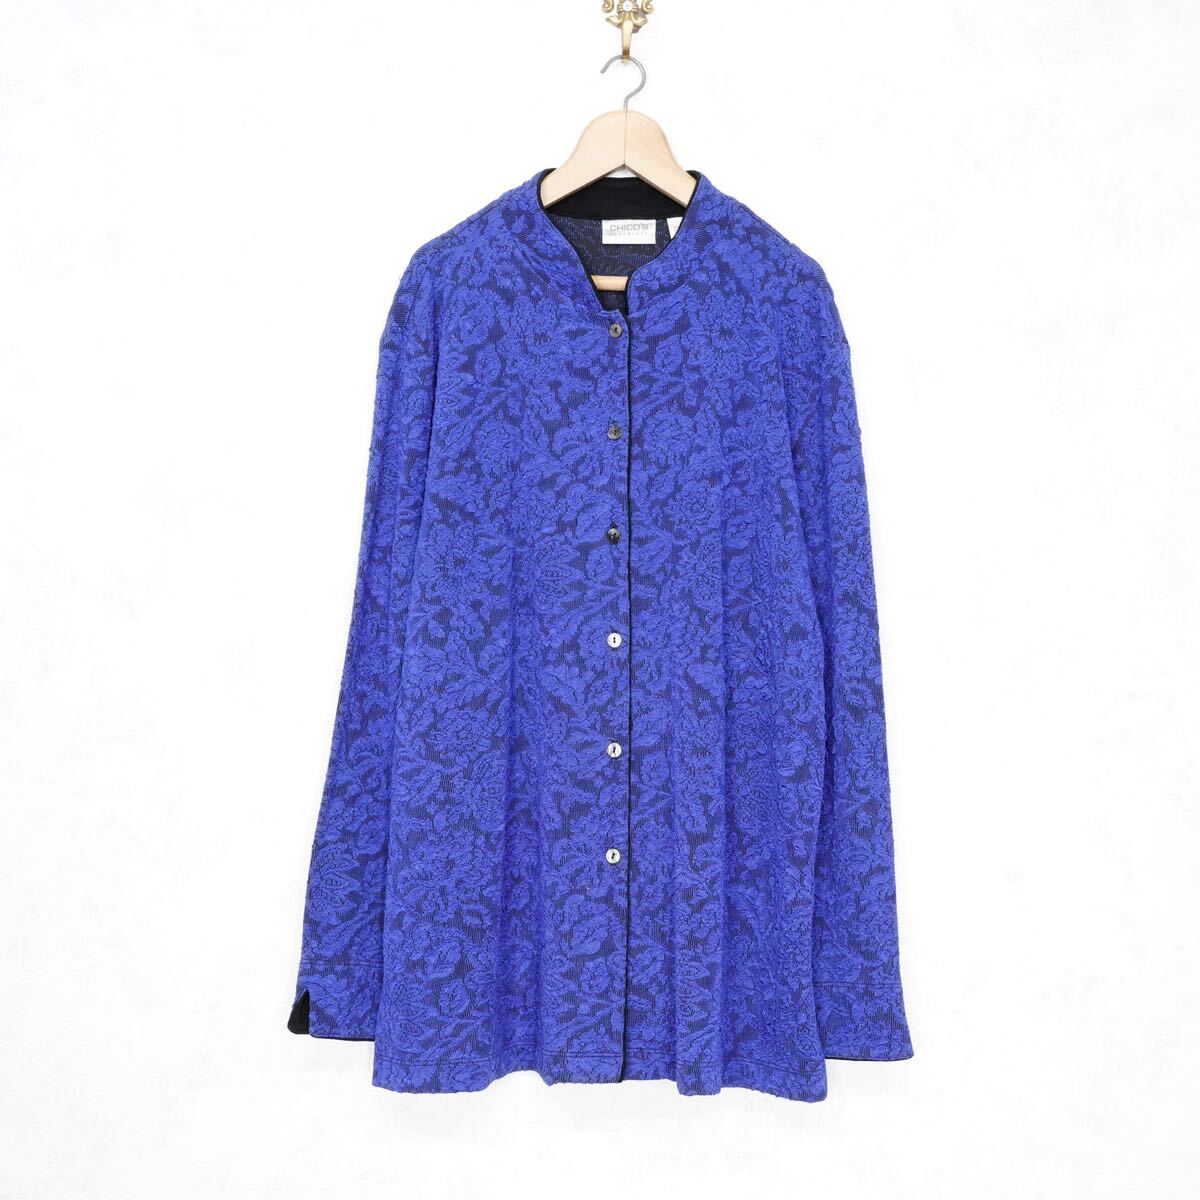 *SPECIAL ITEM* USA VINTAGE CHICO'S LACE EMBROIDERY DESIGN SHIRT JACKET/アメリカ古着レース刺繍デザインシャツジャケット